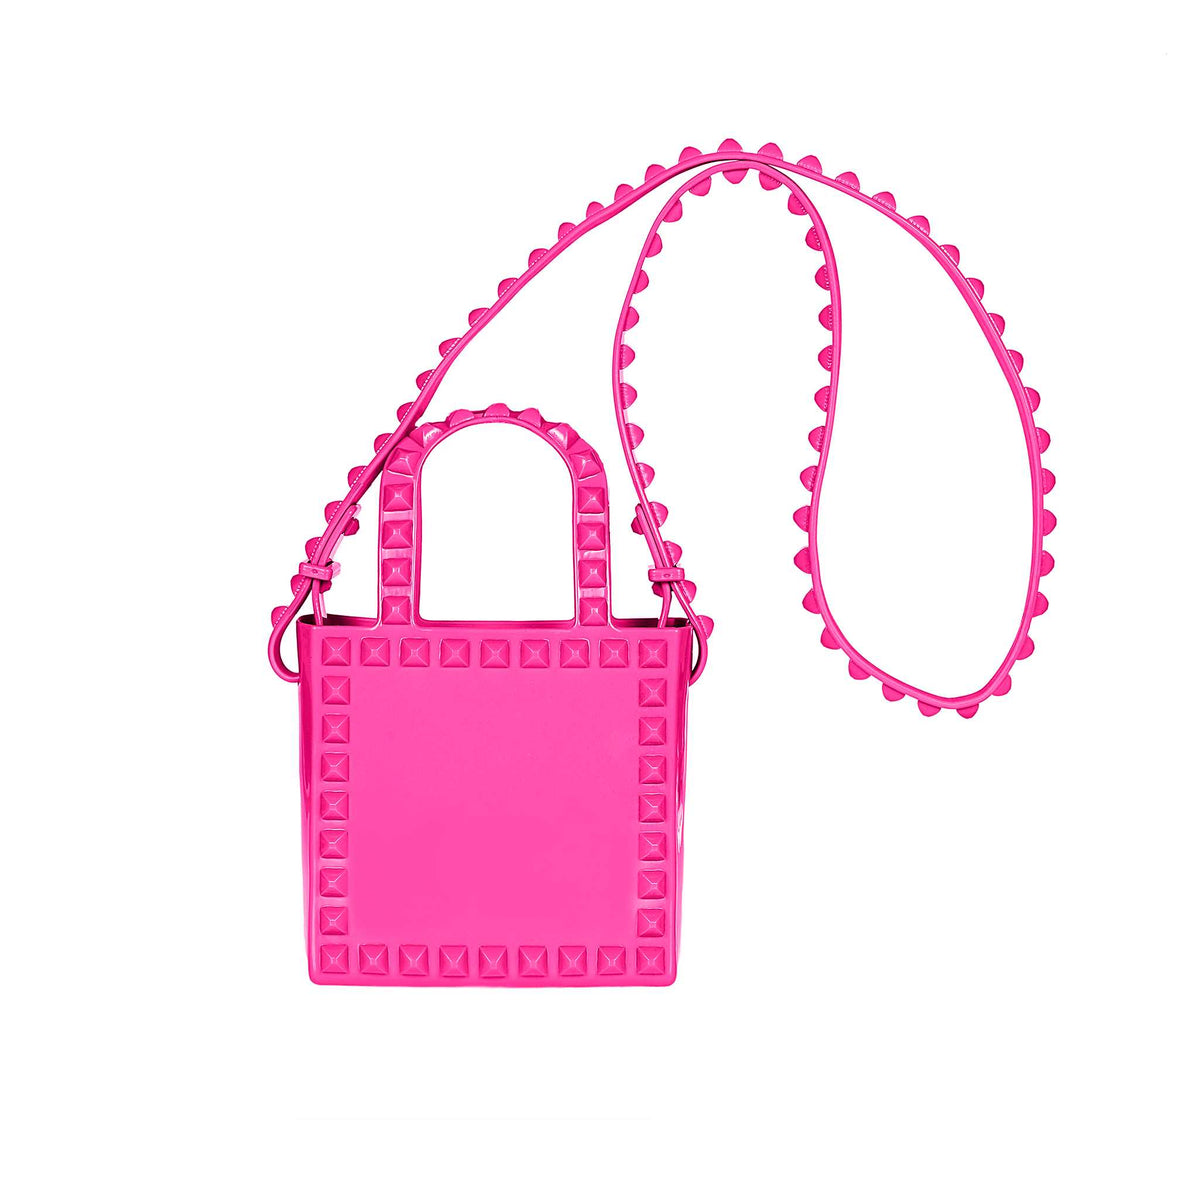 Fuschia jelly kids crossbody bag perfect for vacation lovers from minicarmensol.